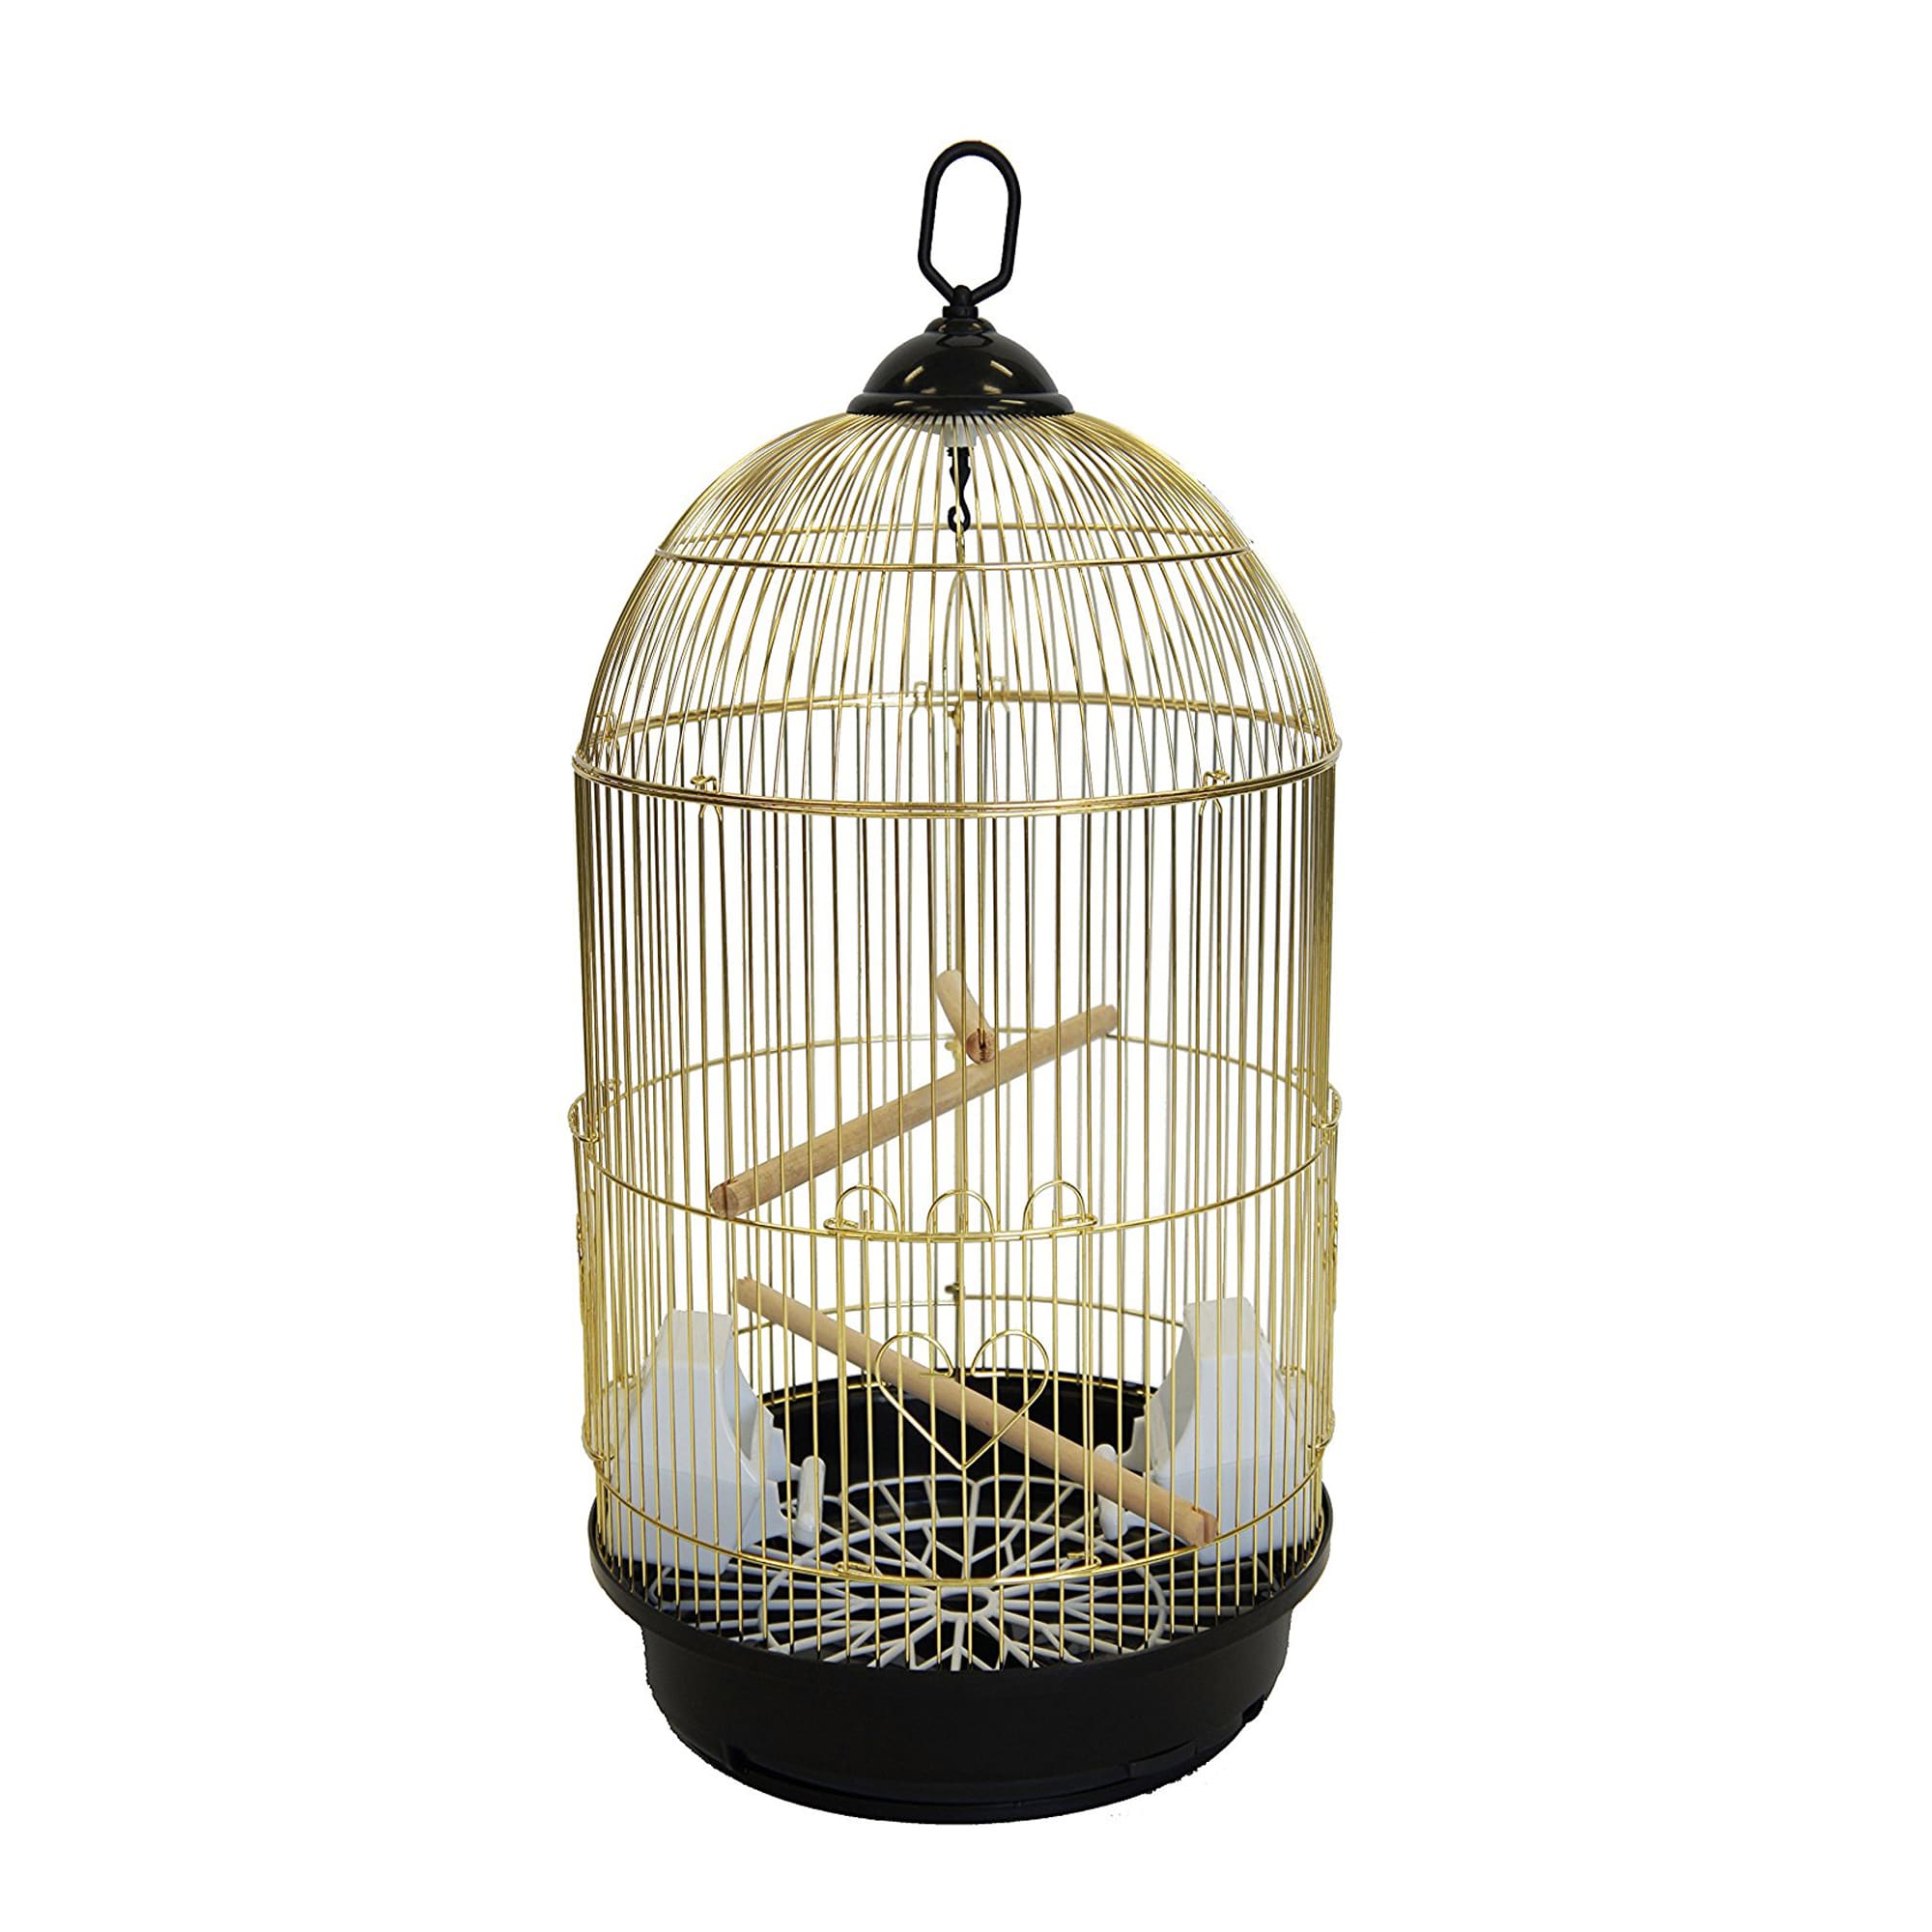 brand new bird cages for sale